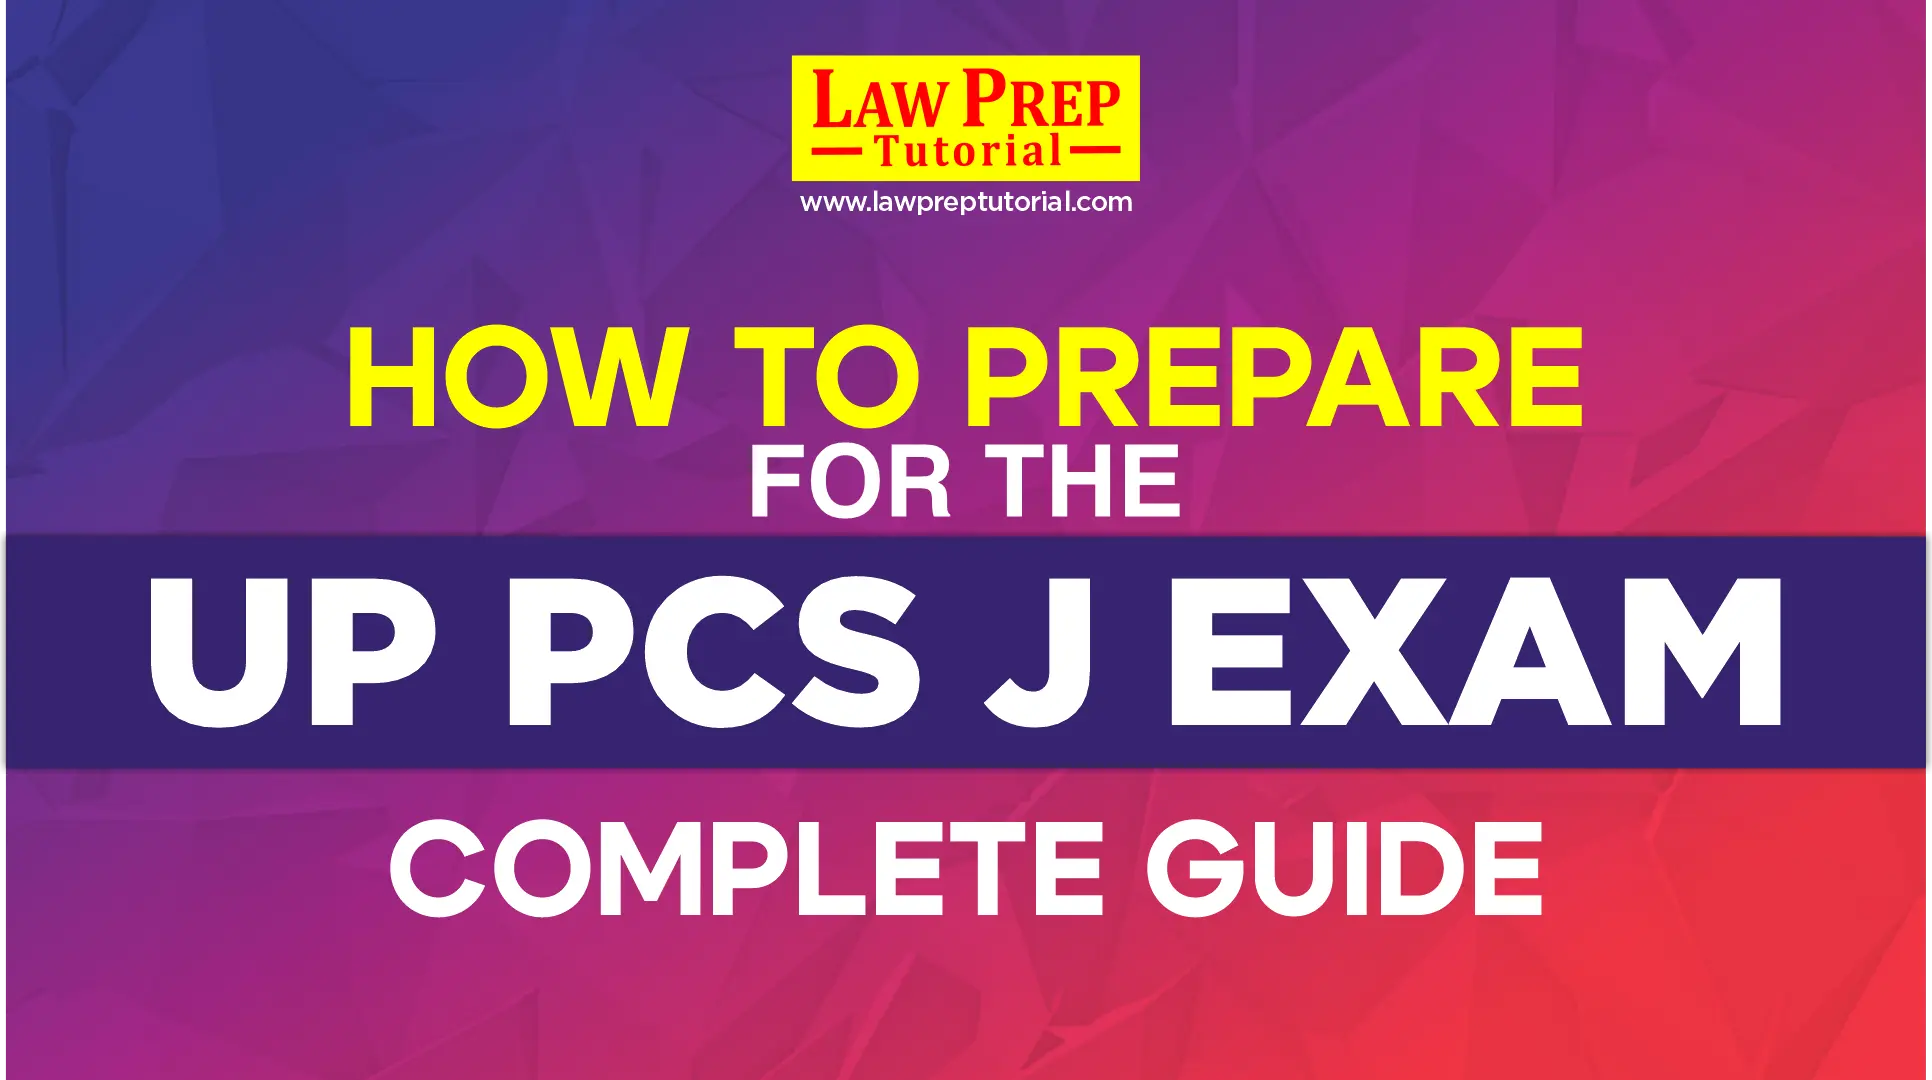 How To Prepare For The UP PCS J Exam? – Complete Guide